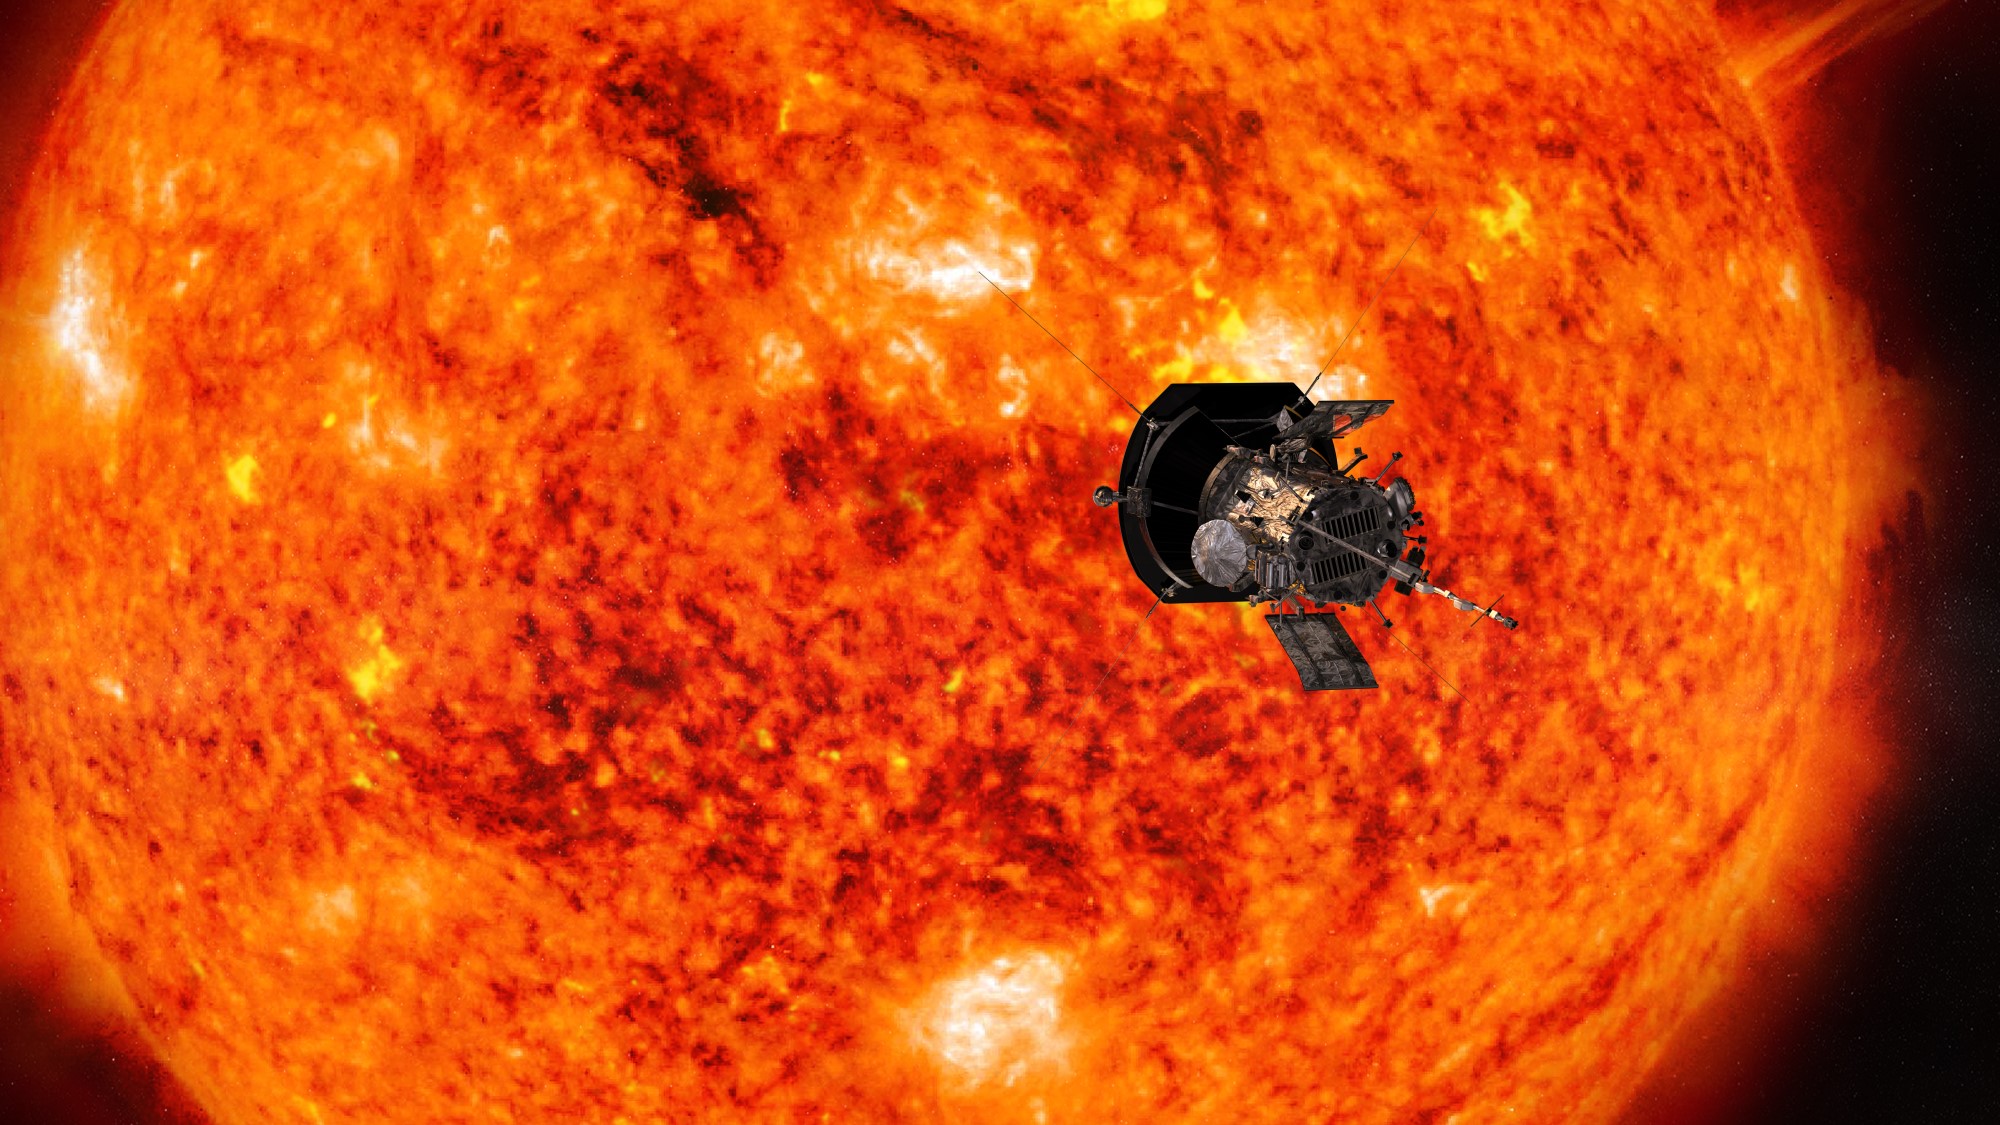 spacecraft in front of textured sun surface